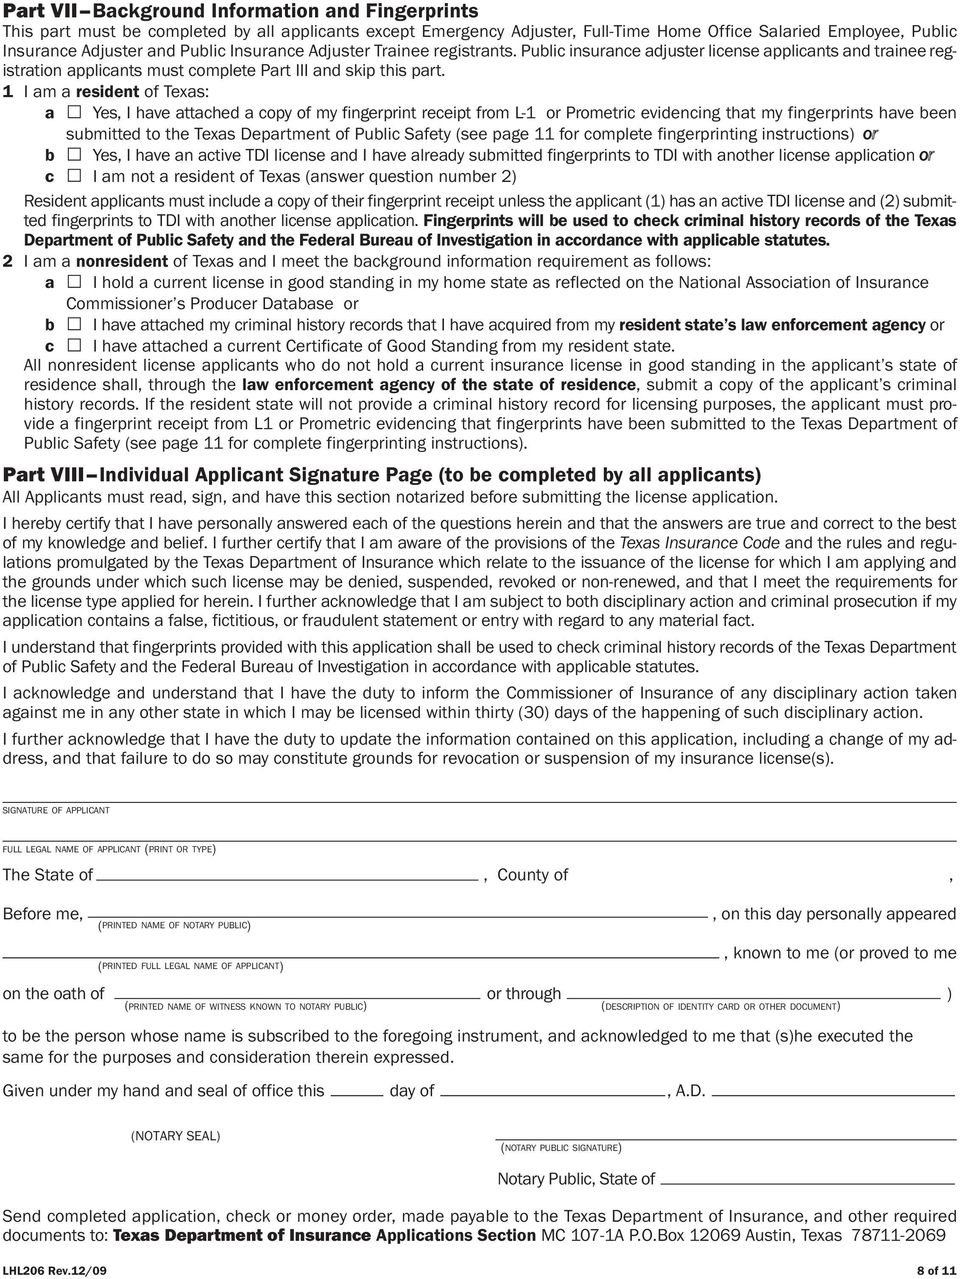 texas department of insurance application